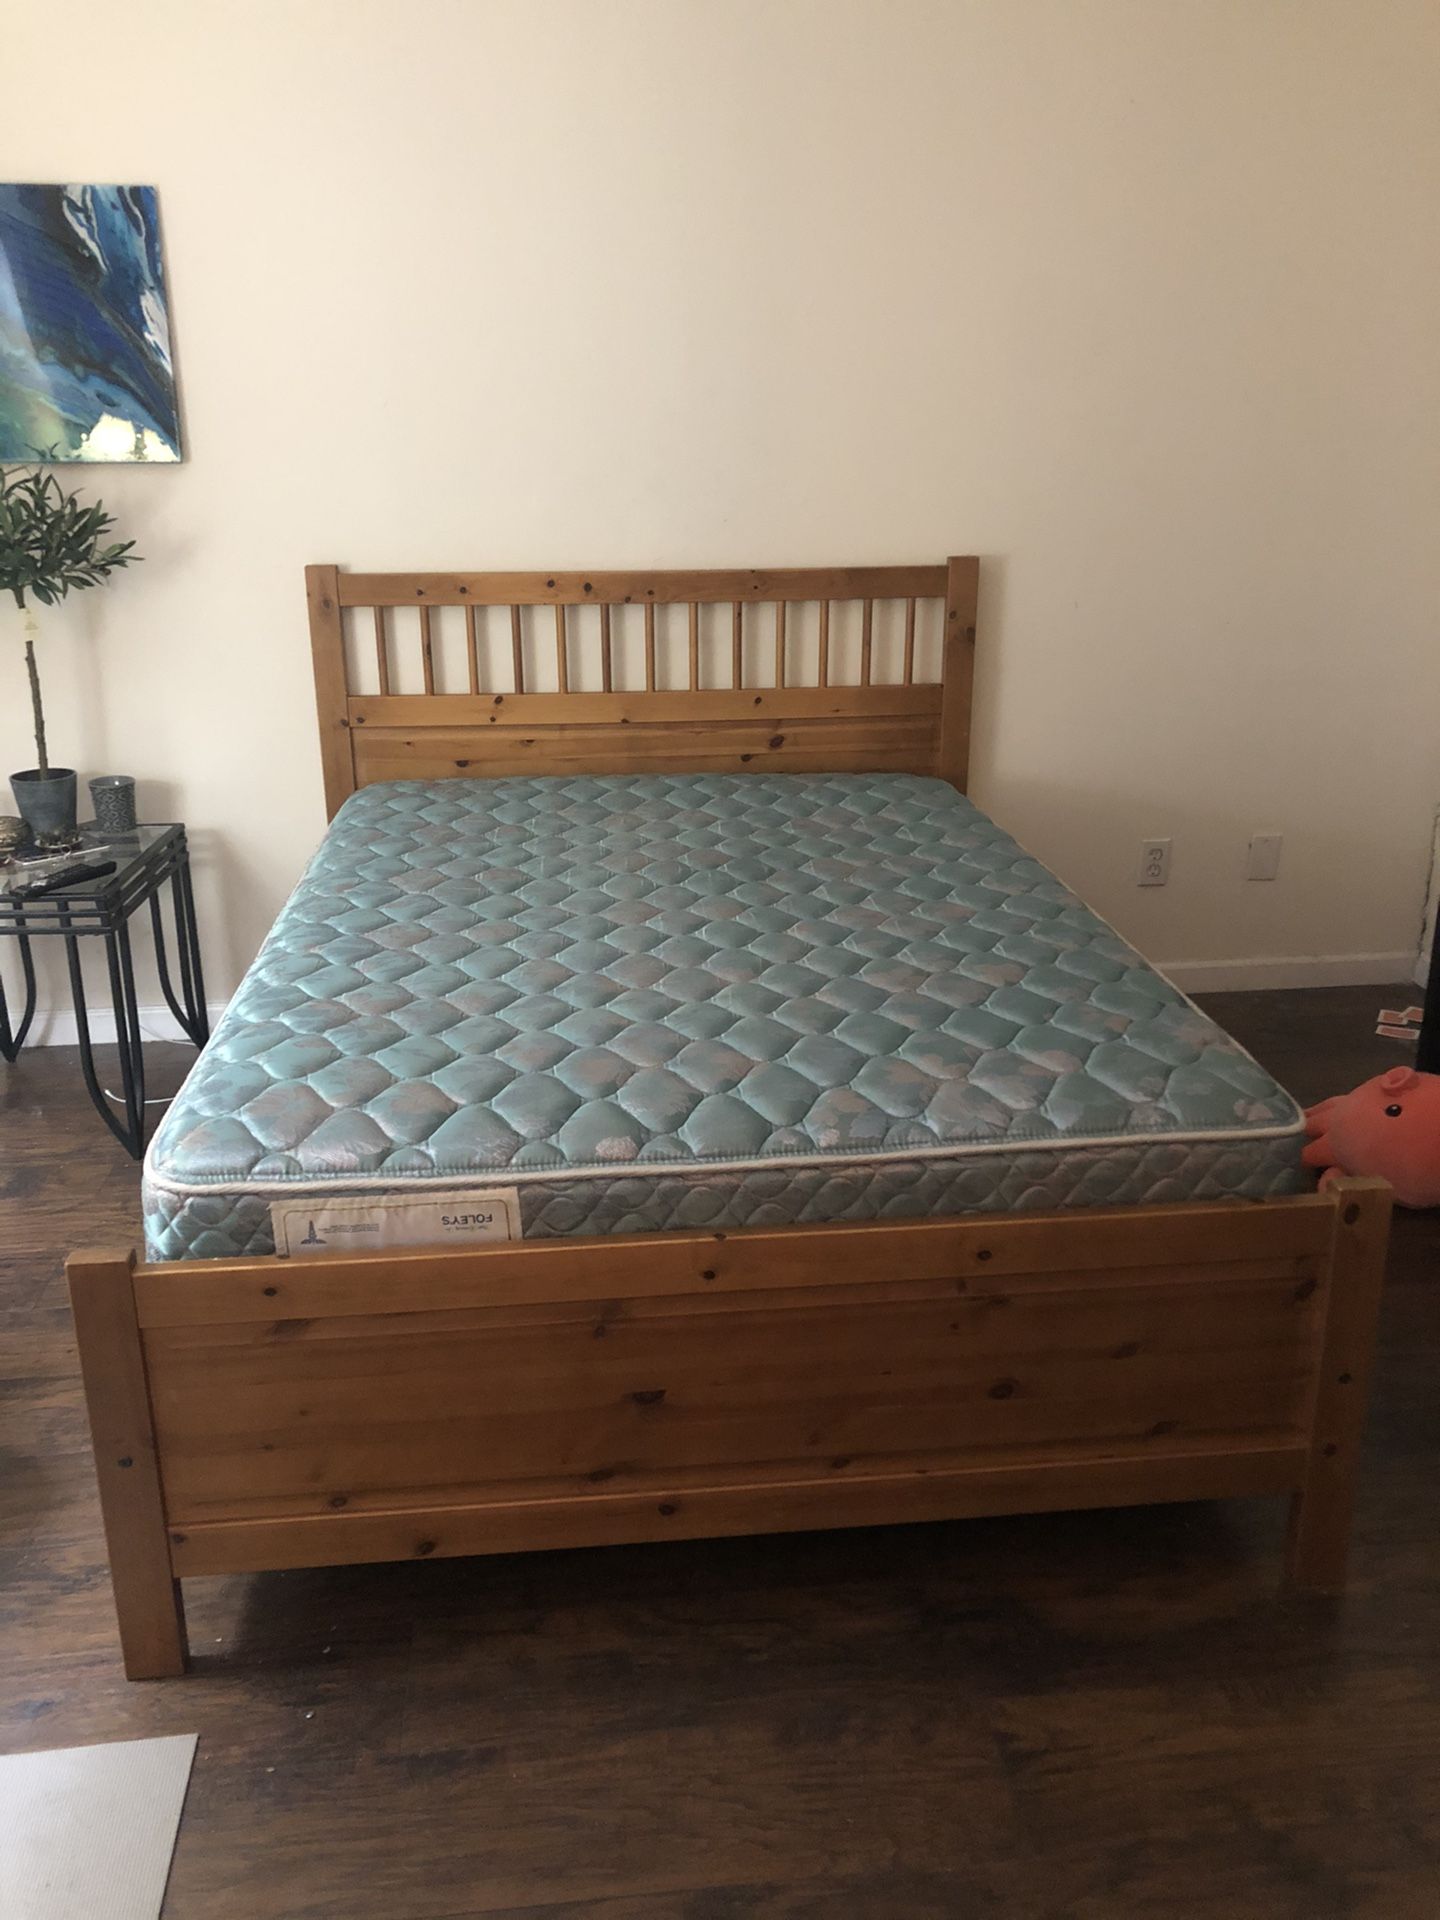 Full mattress, box spring, and bed frame